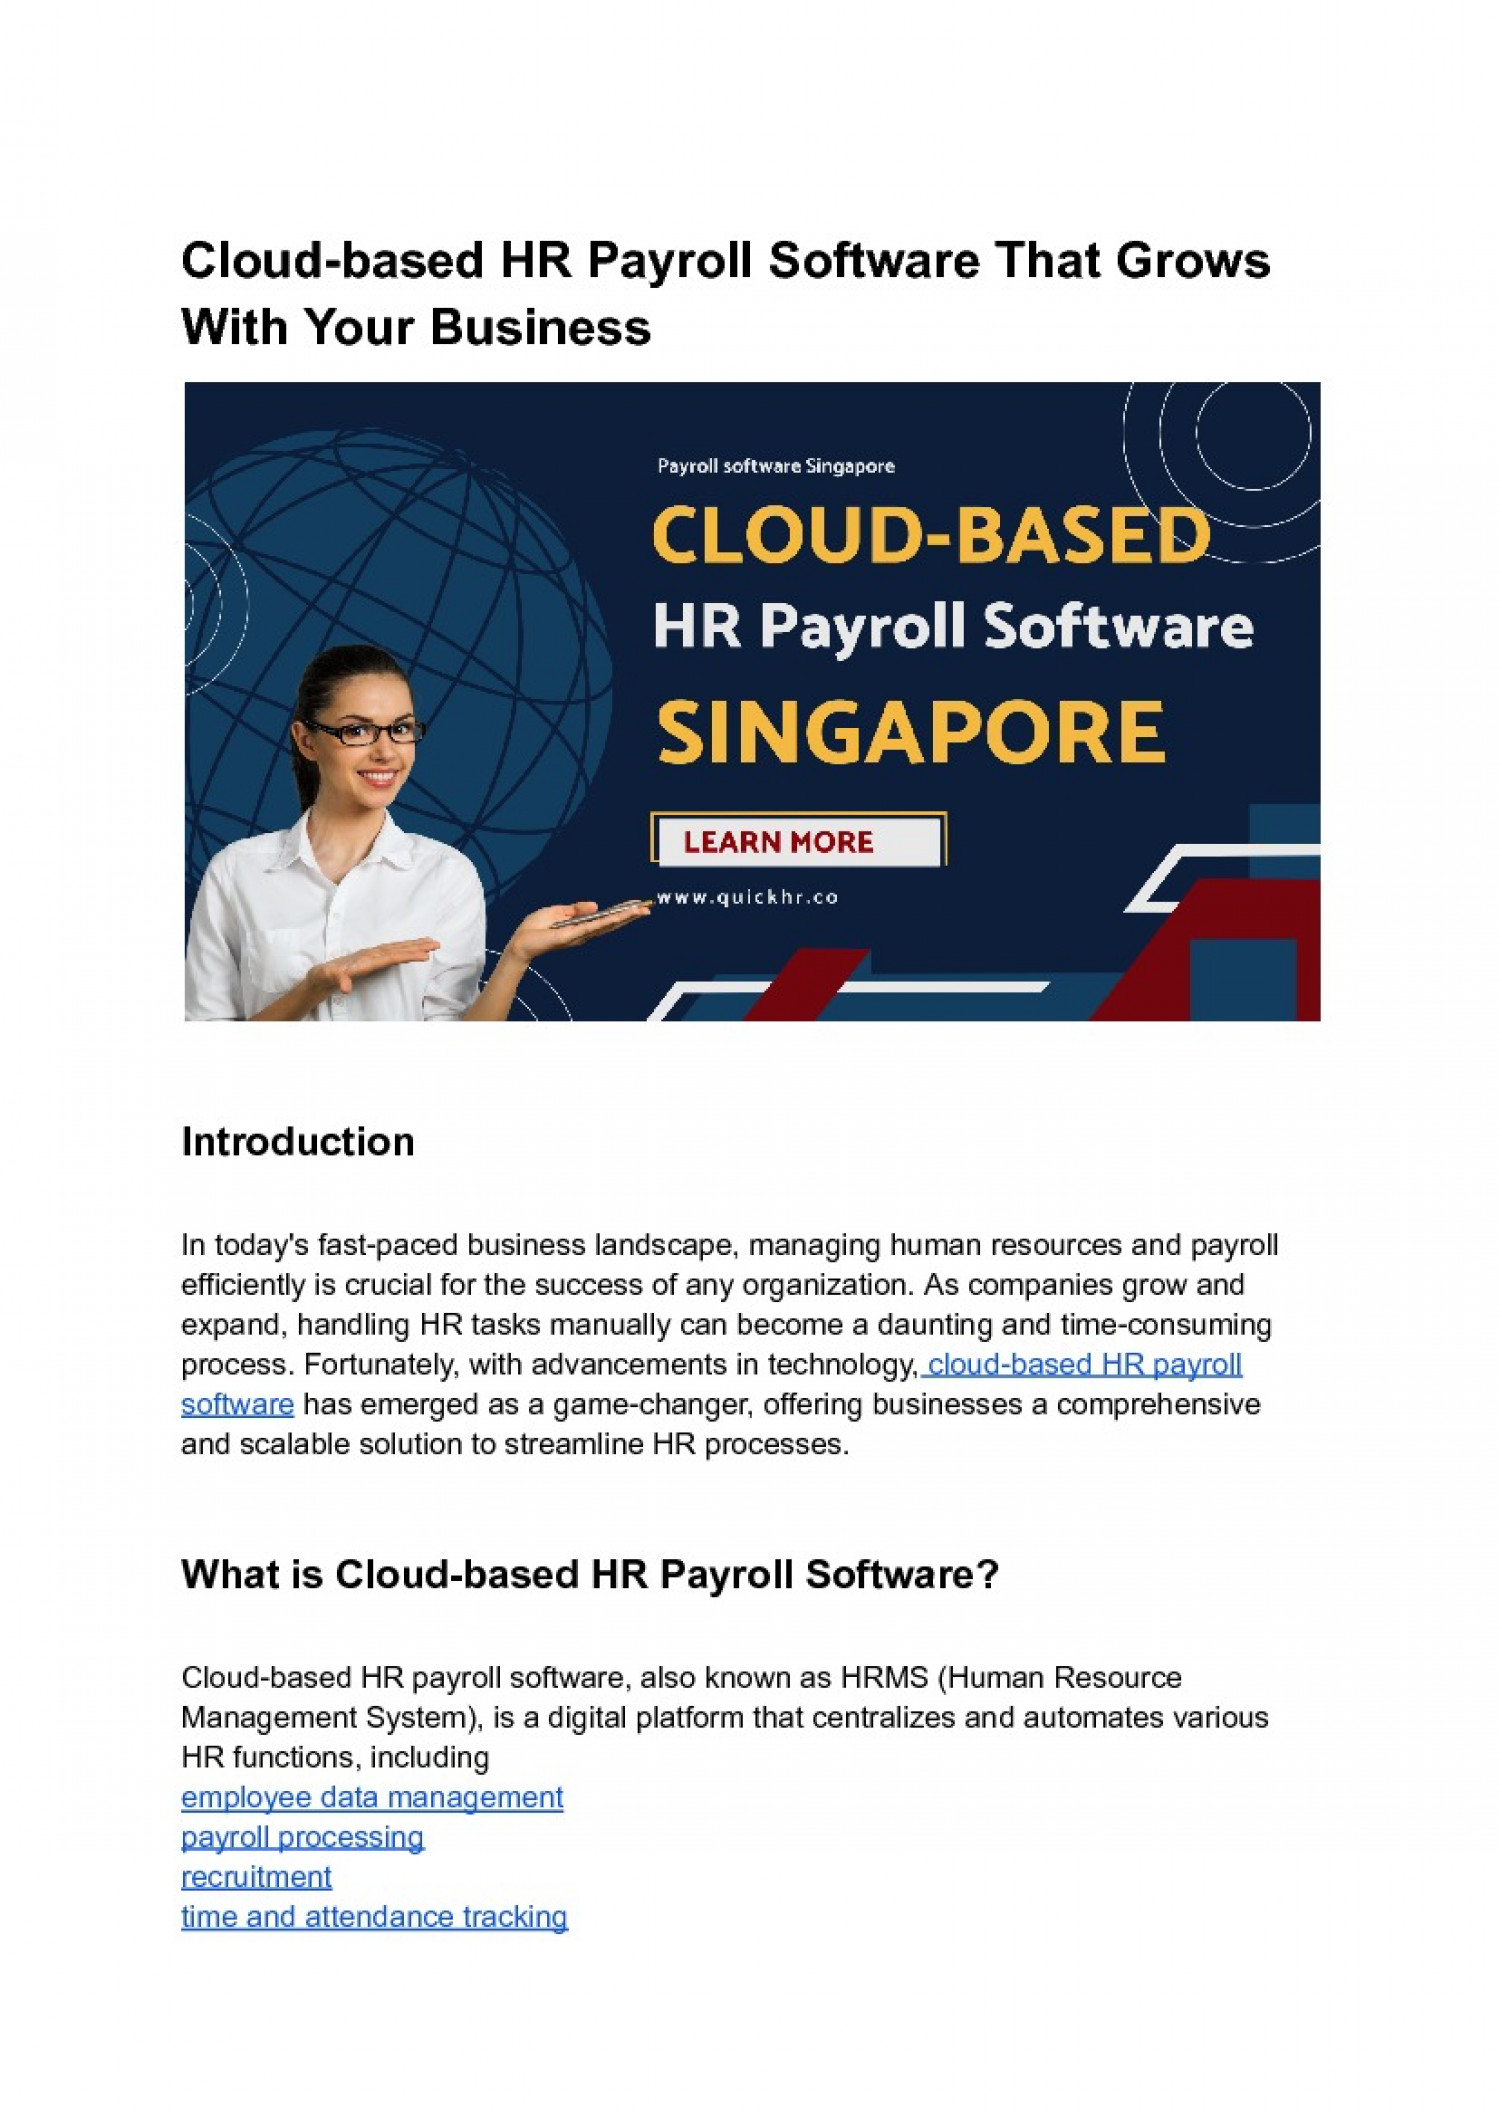 Cloud-based HR Payroll Software in Singapore That Grows With Your Business Infographic